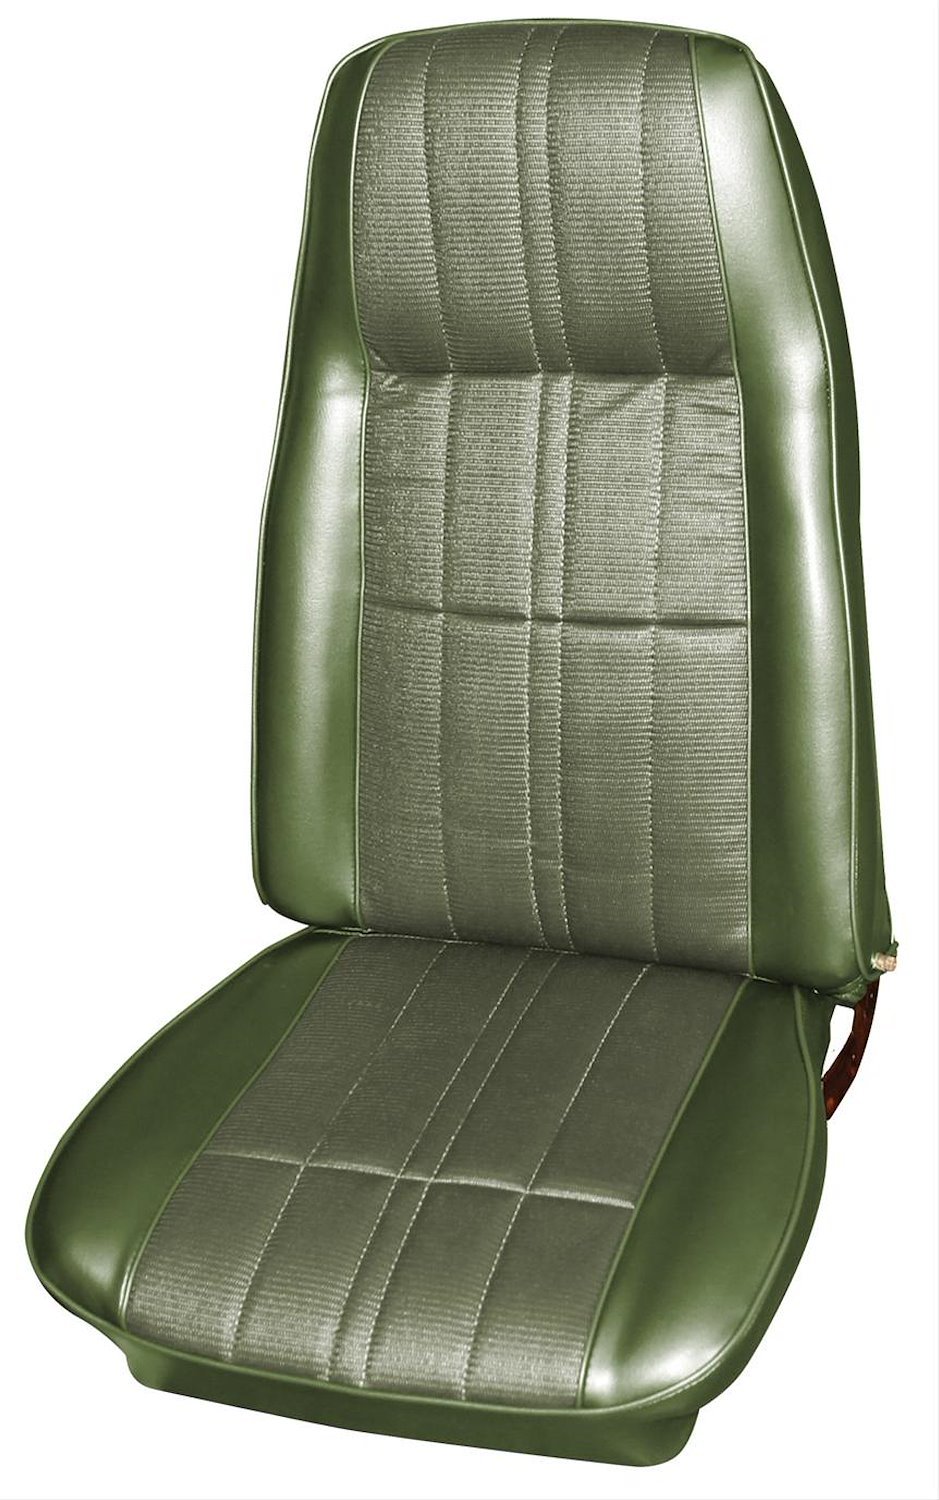 1971-1973 Ford Mustang Convertible Deluxe Interior Front Bucket and Rear Bench Seat Upholstery Set